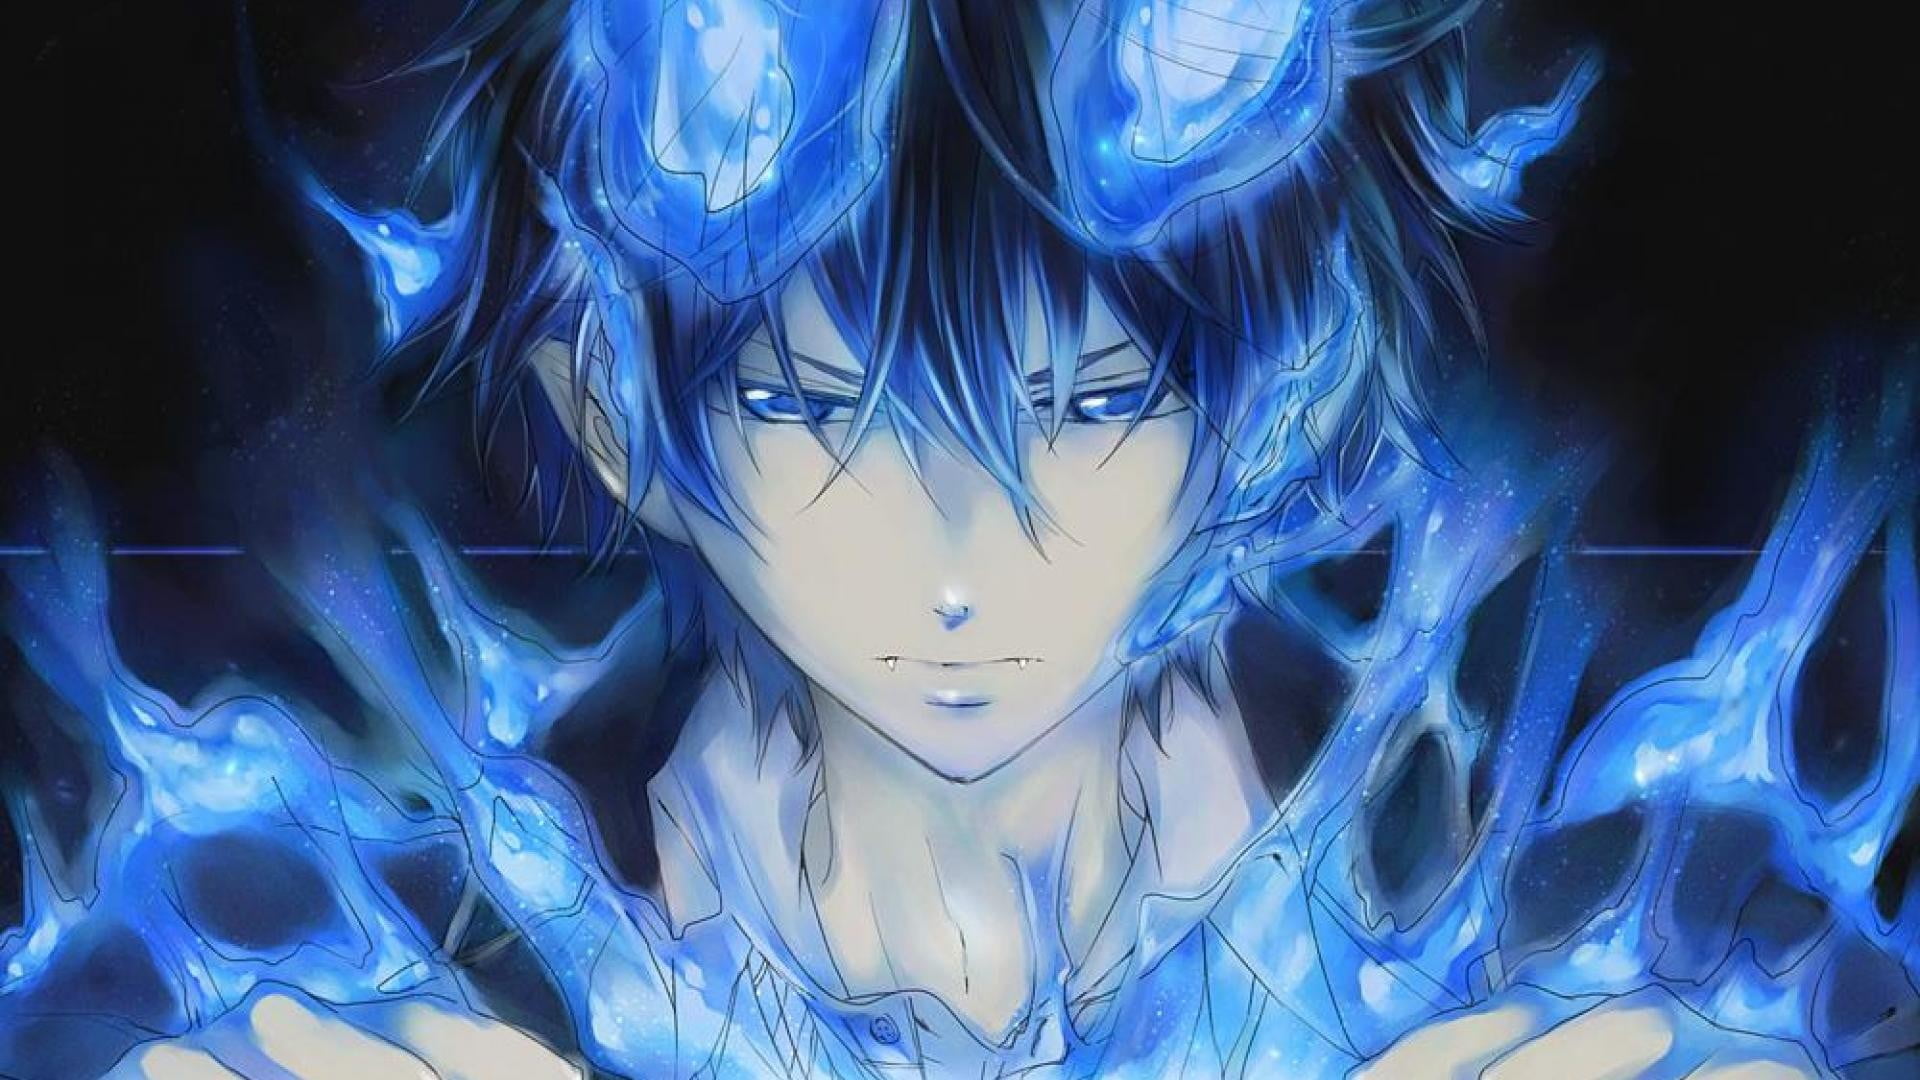 6. "Rin Okumura from Blue Exorcist" - wide 2